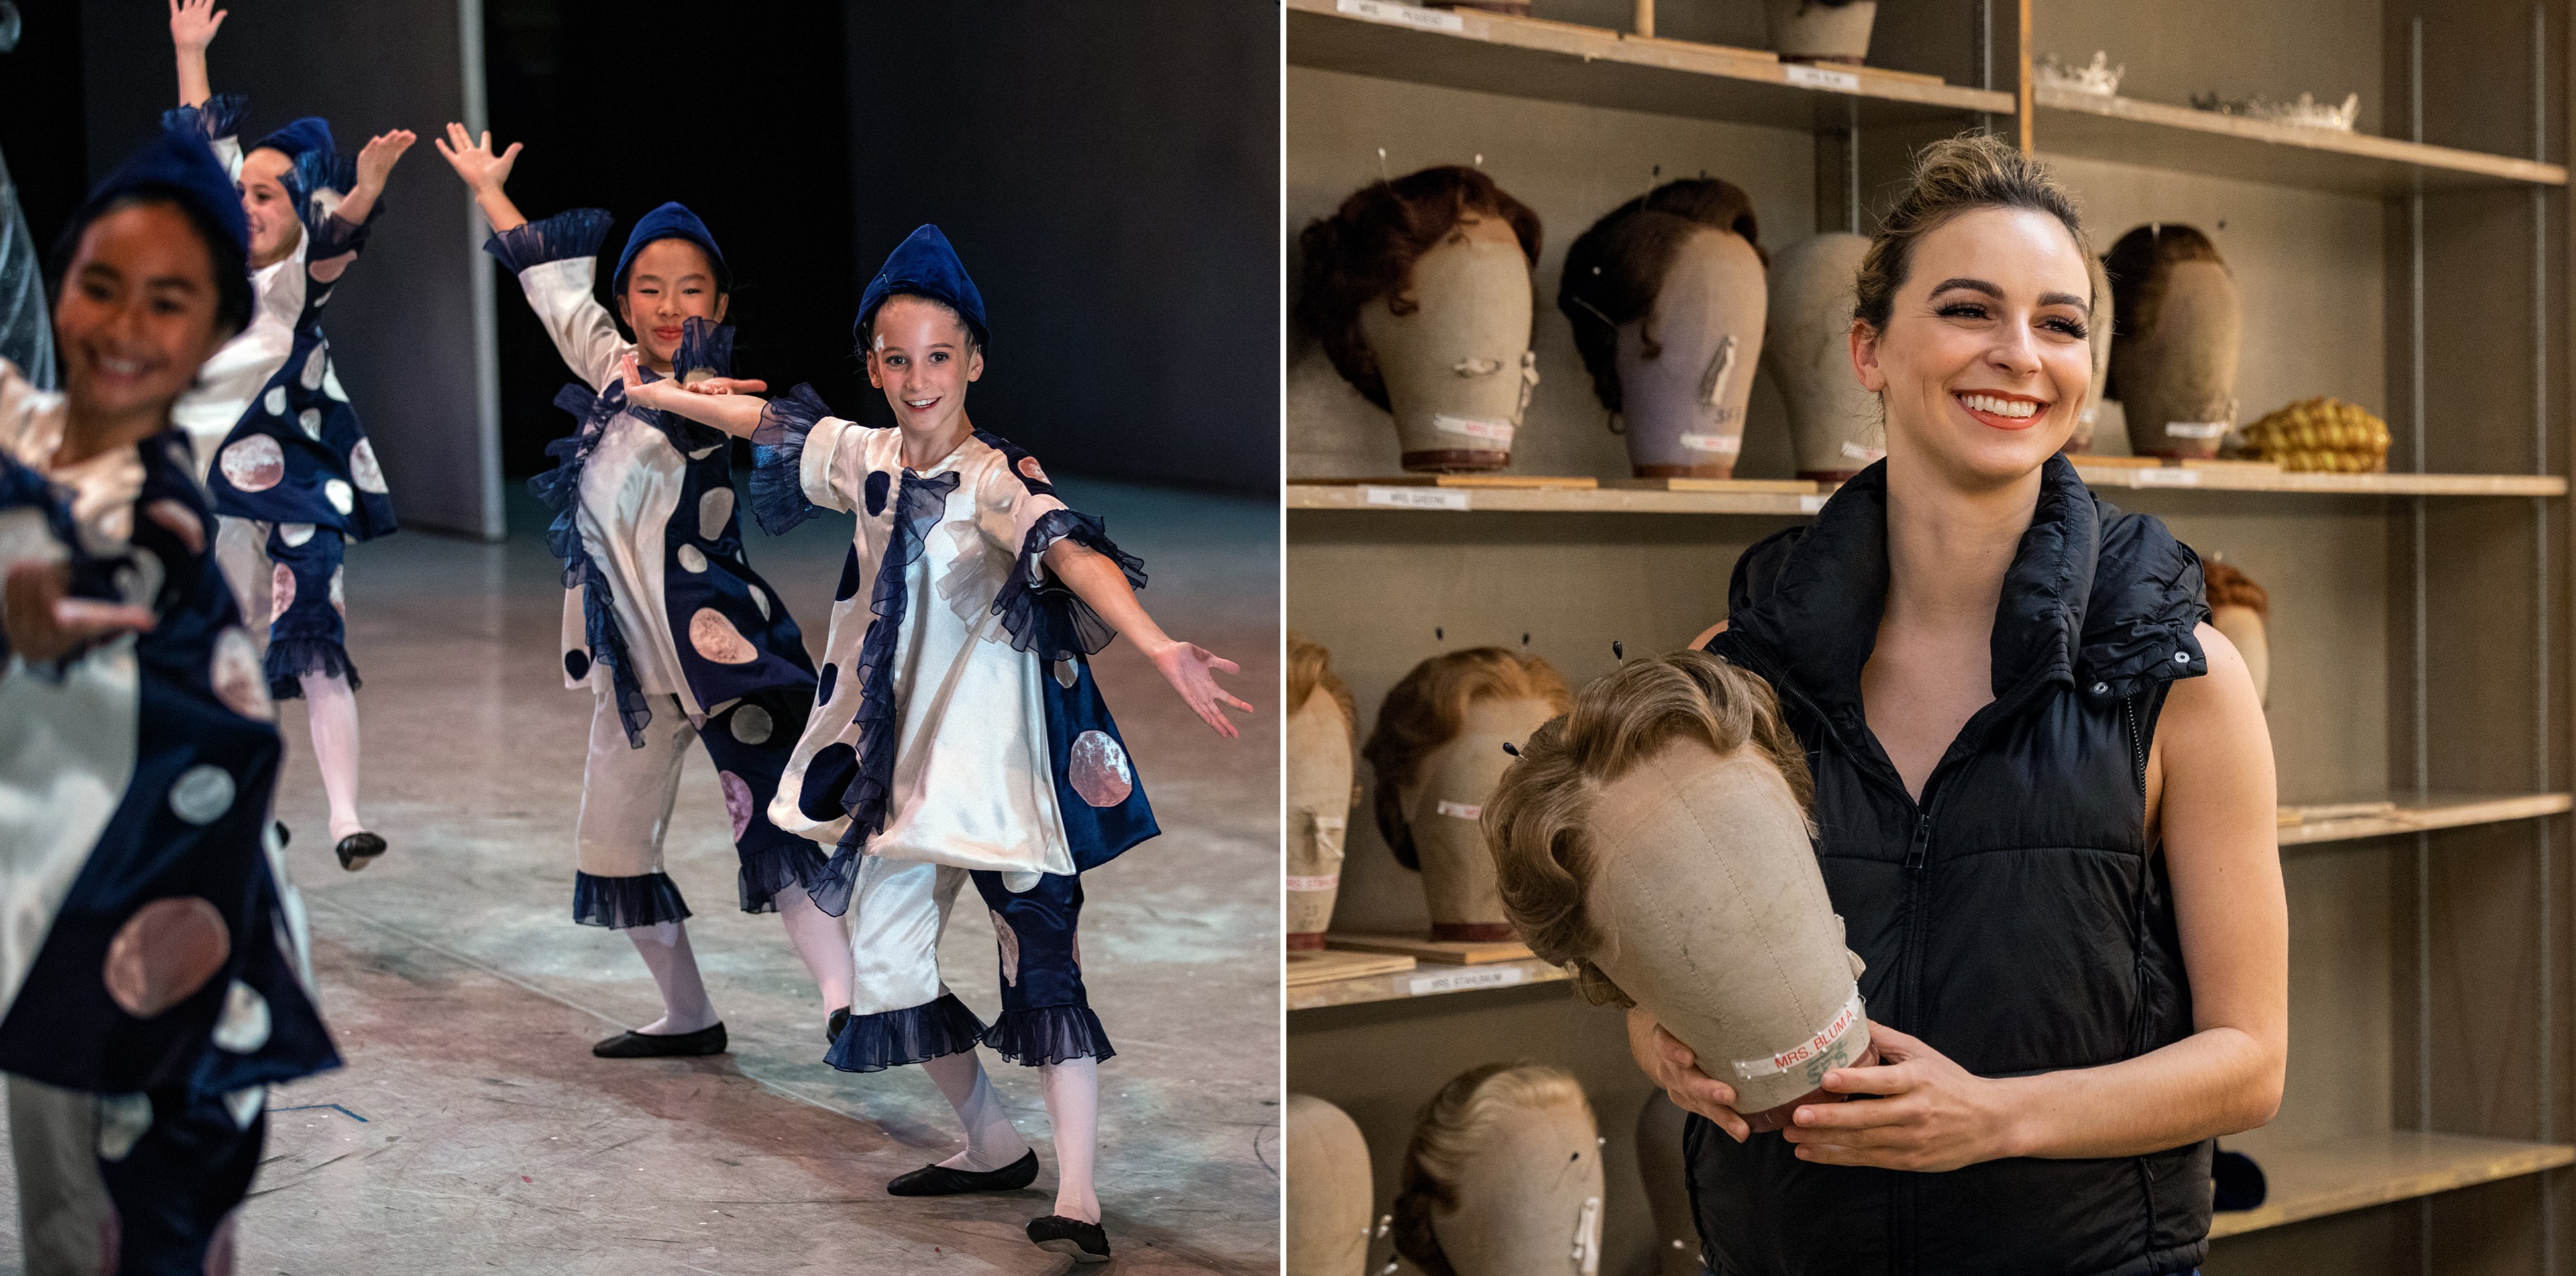 A side by side photo of group of youth performing on stage and a person smiling while holding a mannequin head